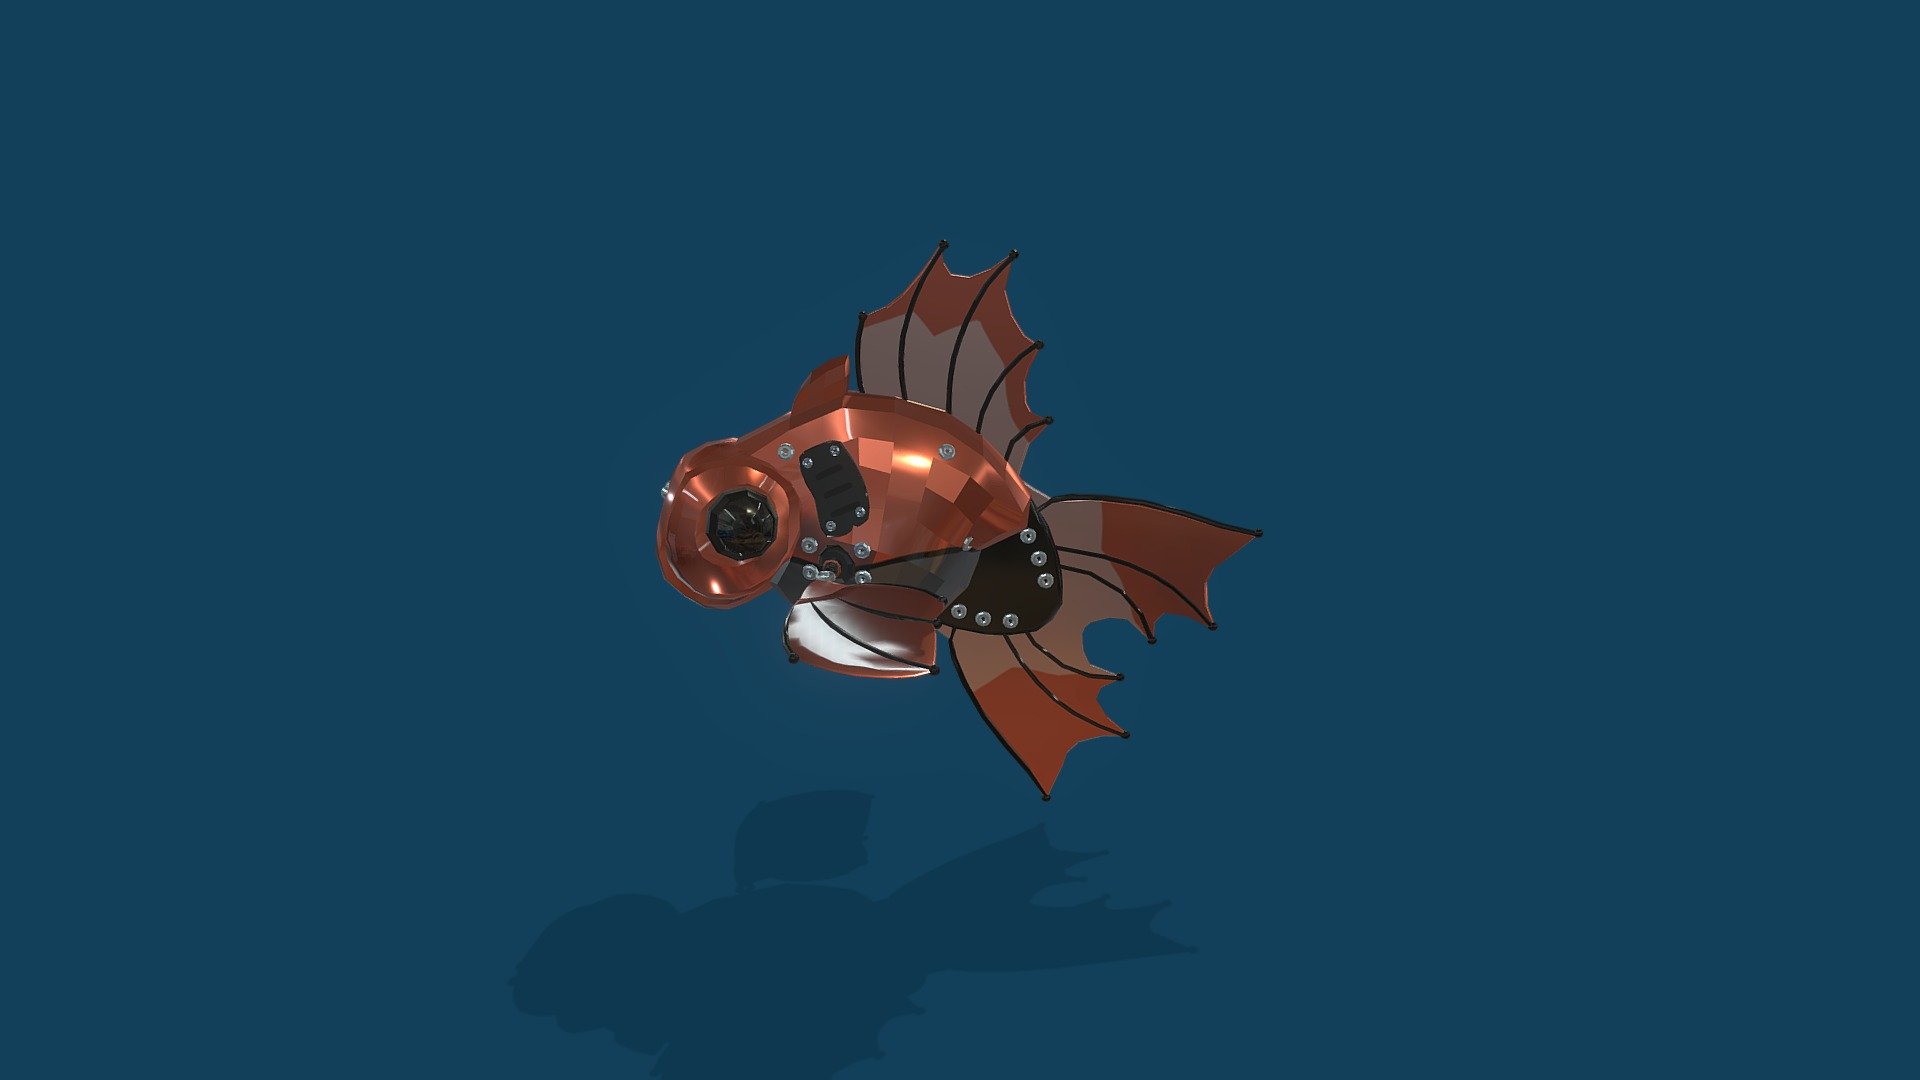 3d modelling of a goldfish done in maya and texturing in photoshop

texture size: 2048x2048
tris: 15584 - Goldfish robot - 3D model by cuiwei61 3d model